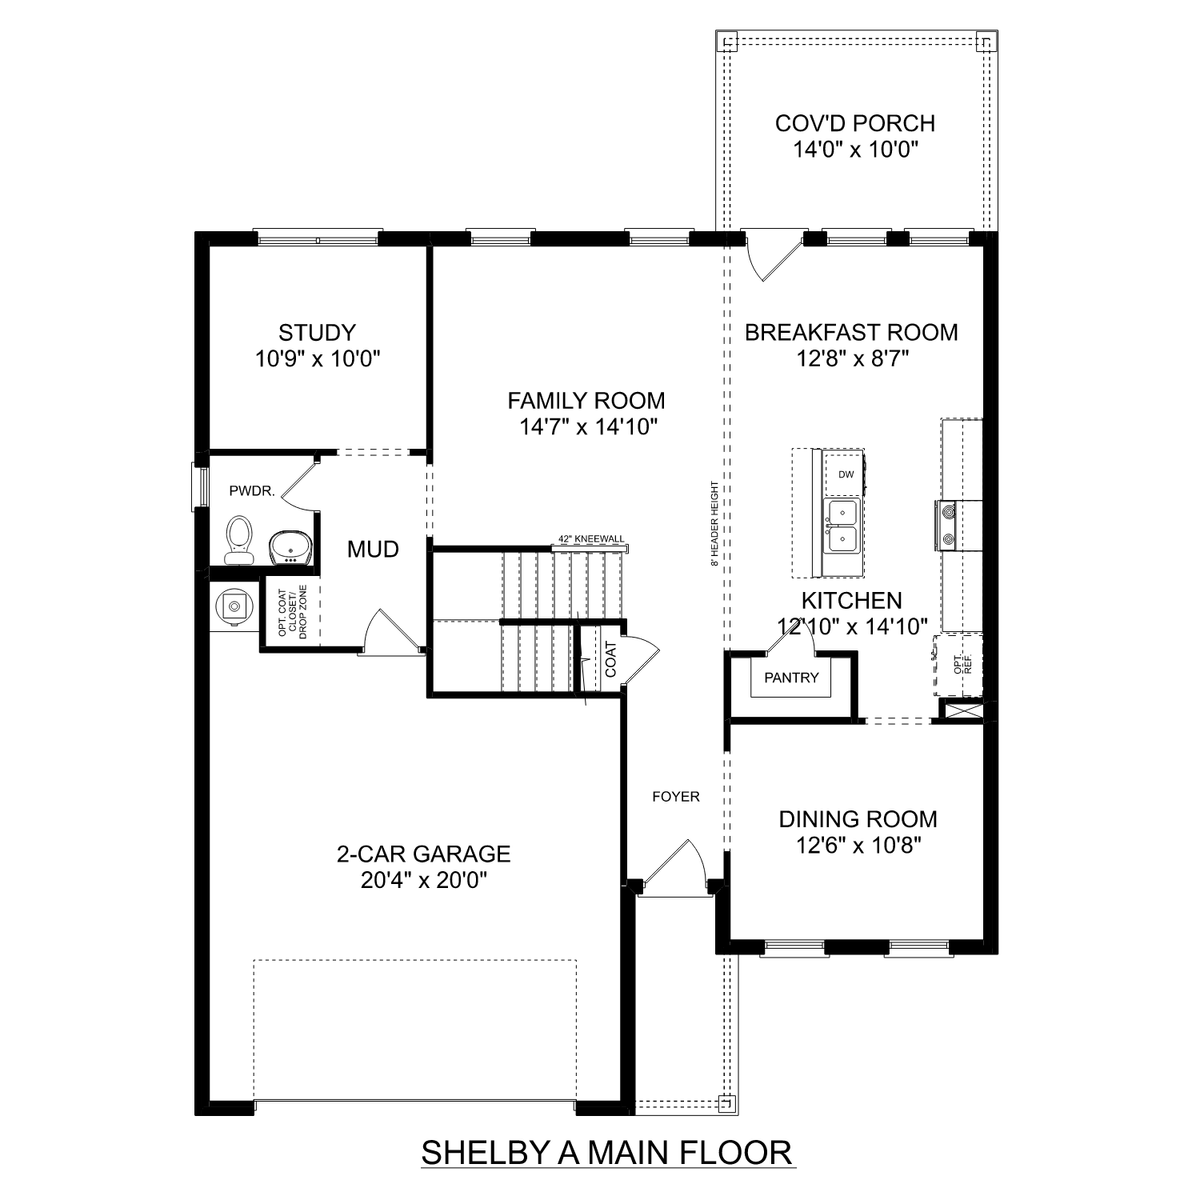 1 - The Shelby A buildable floor plan layout in Davidson Homes' Ivy Hills community.